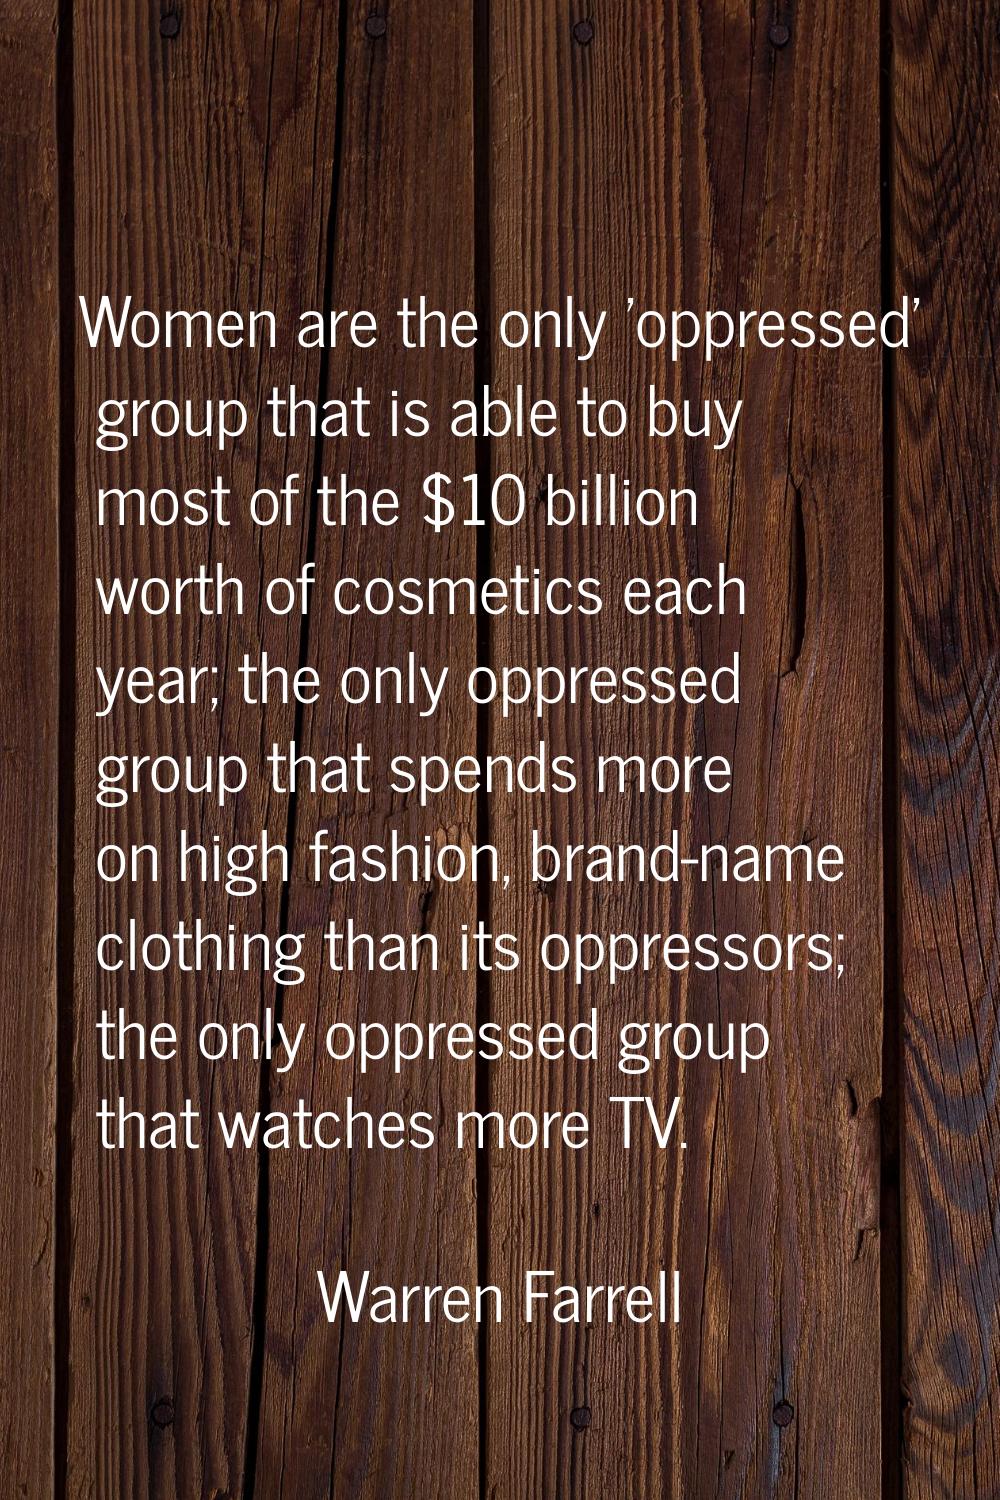 Women are the only 'oppressed' group that is able to buy most of the $10 billion worth of cosmetics